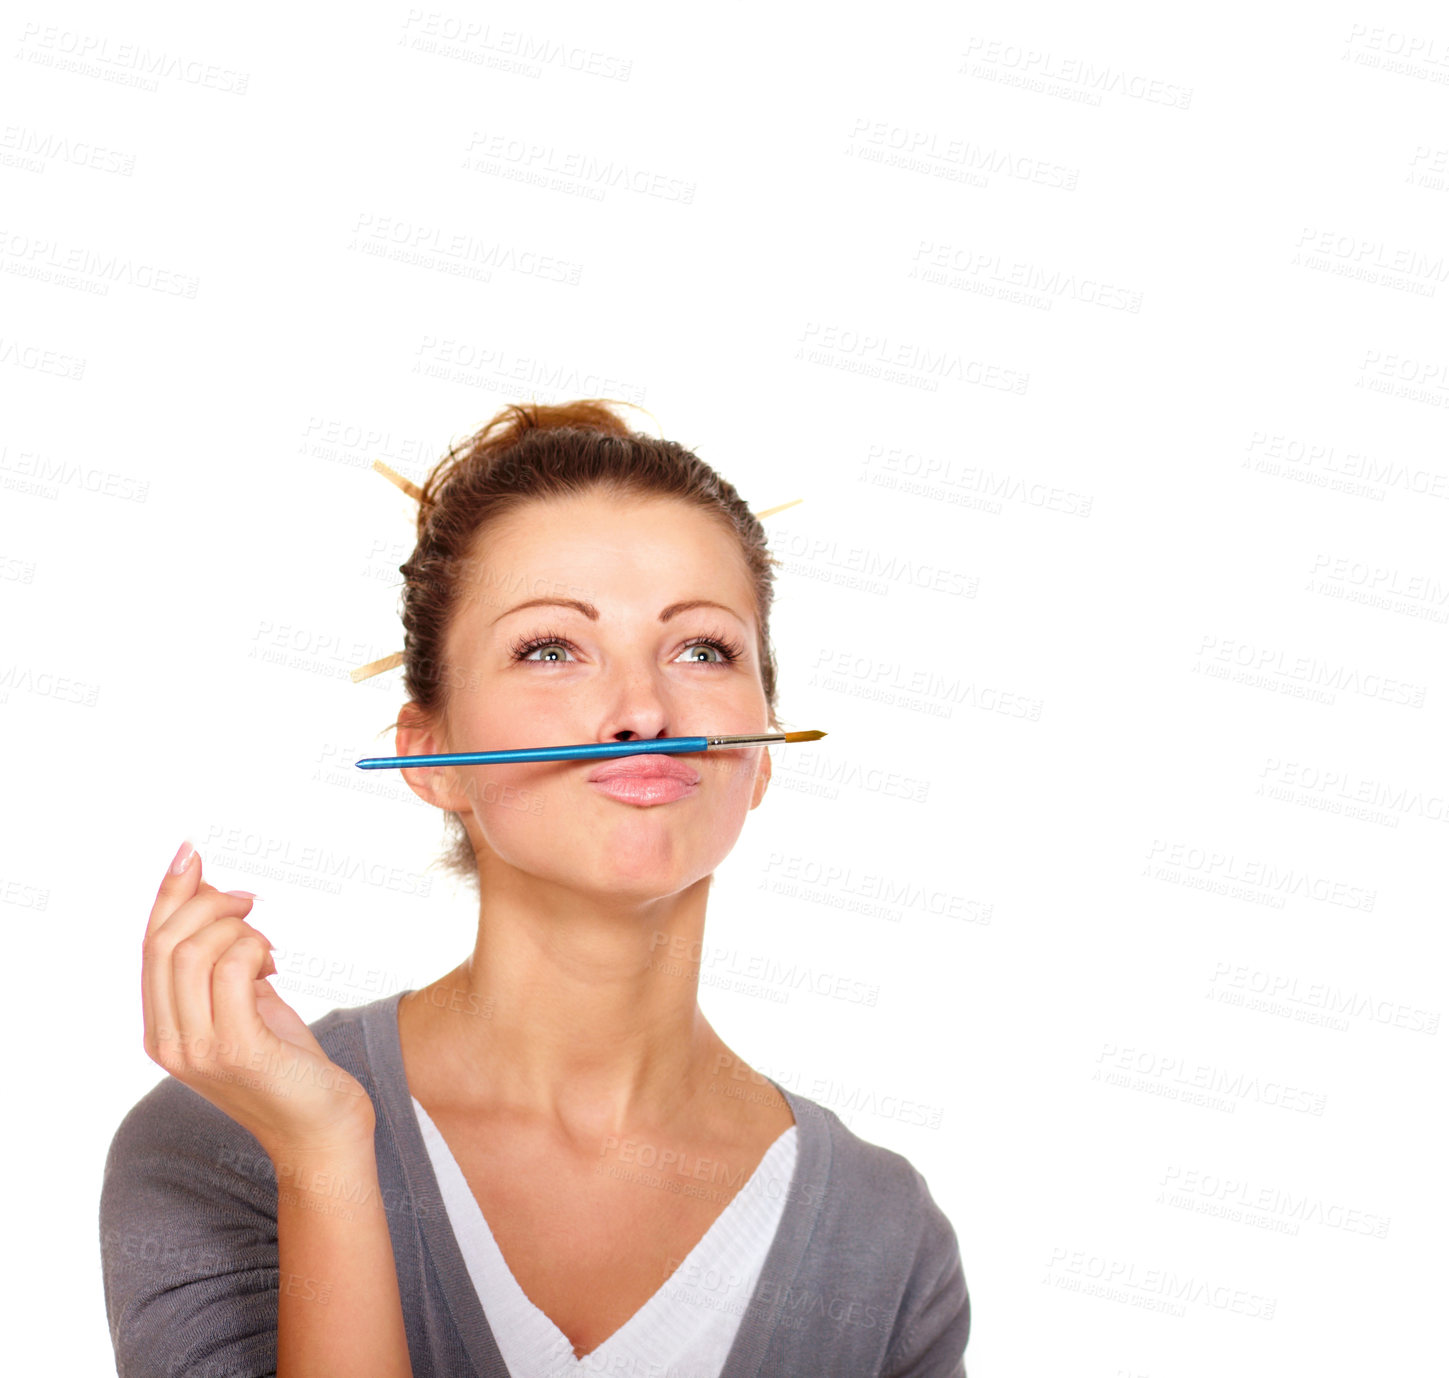 Buy stock photo Studio shot of an attractive woman balancing a paint brush on her upper lip